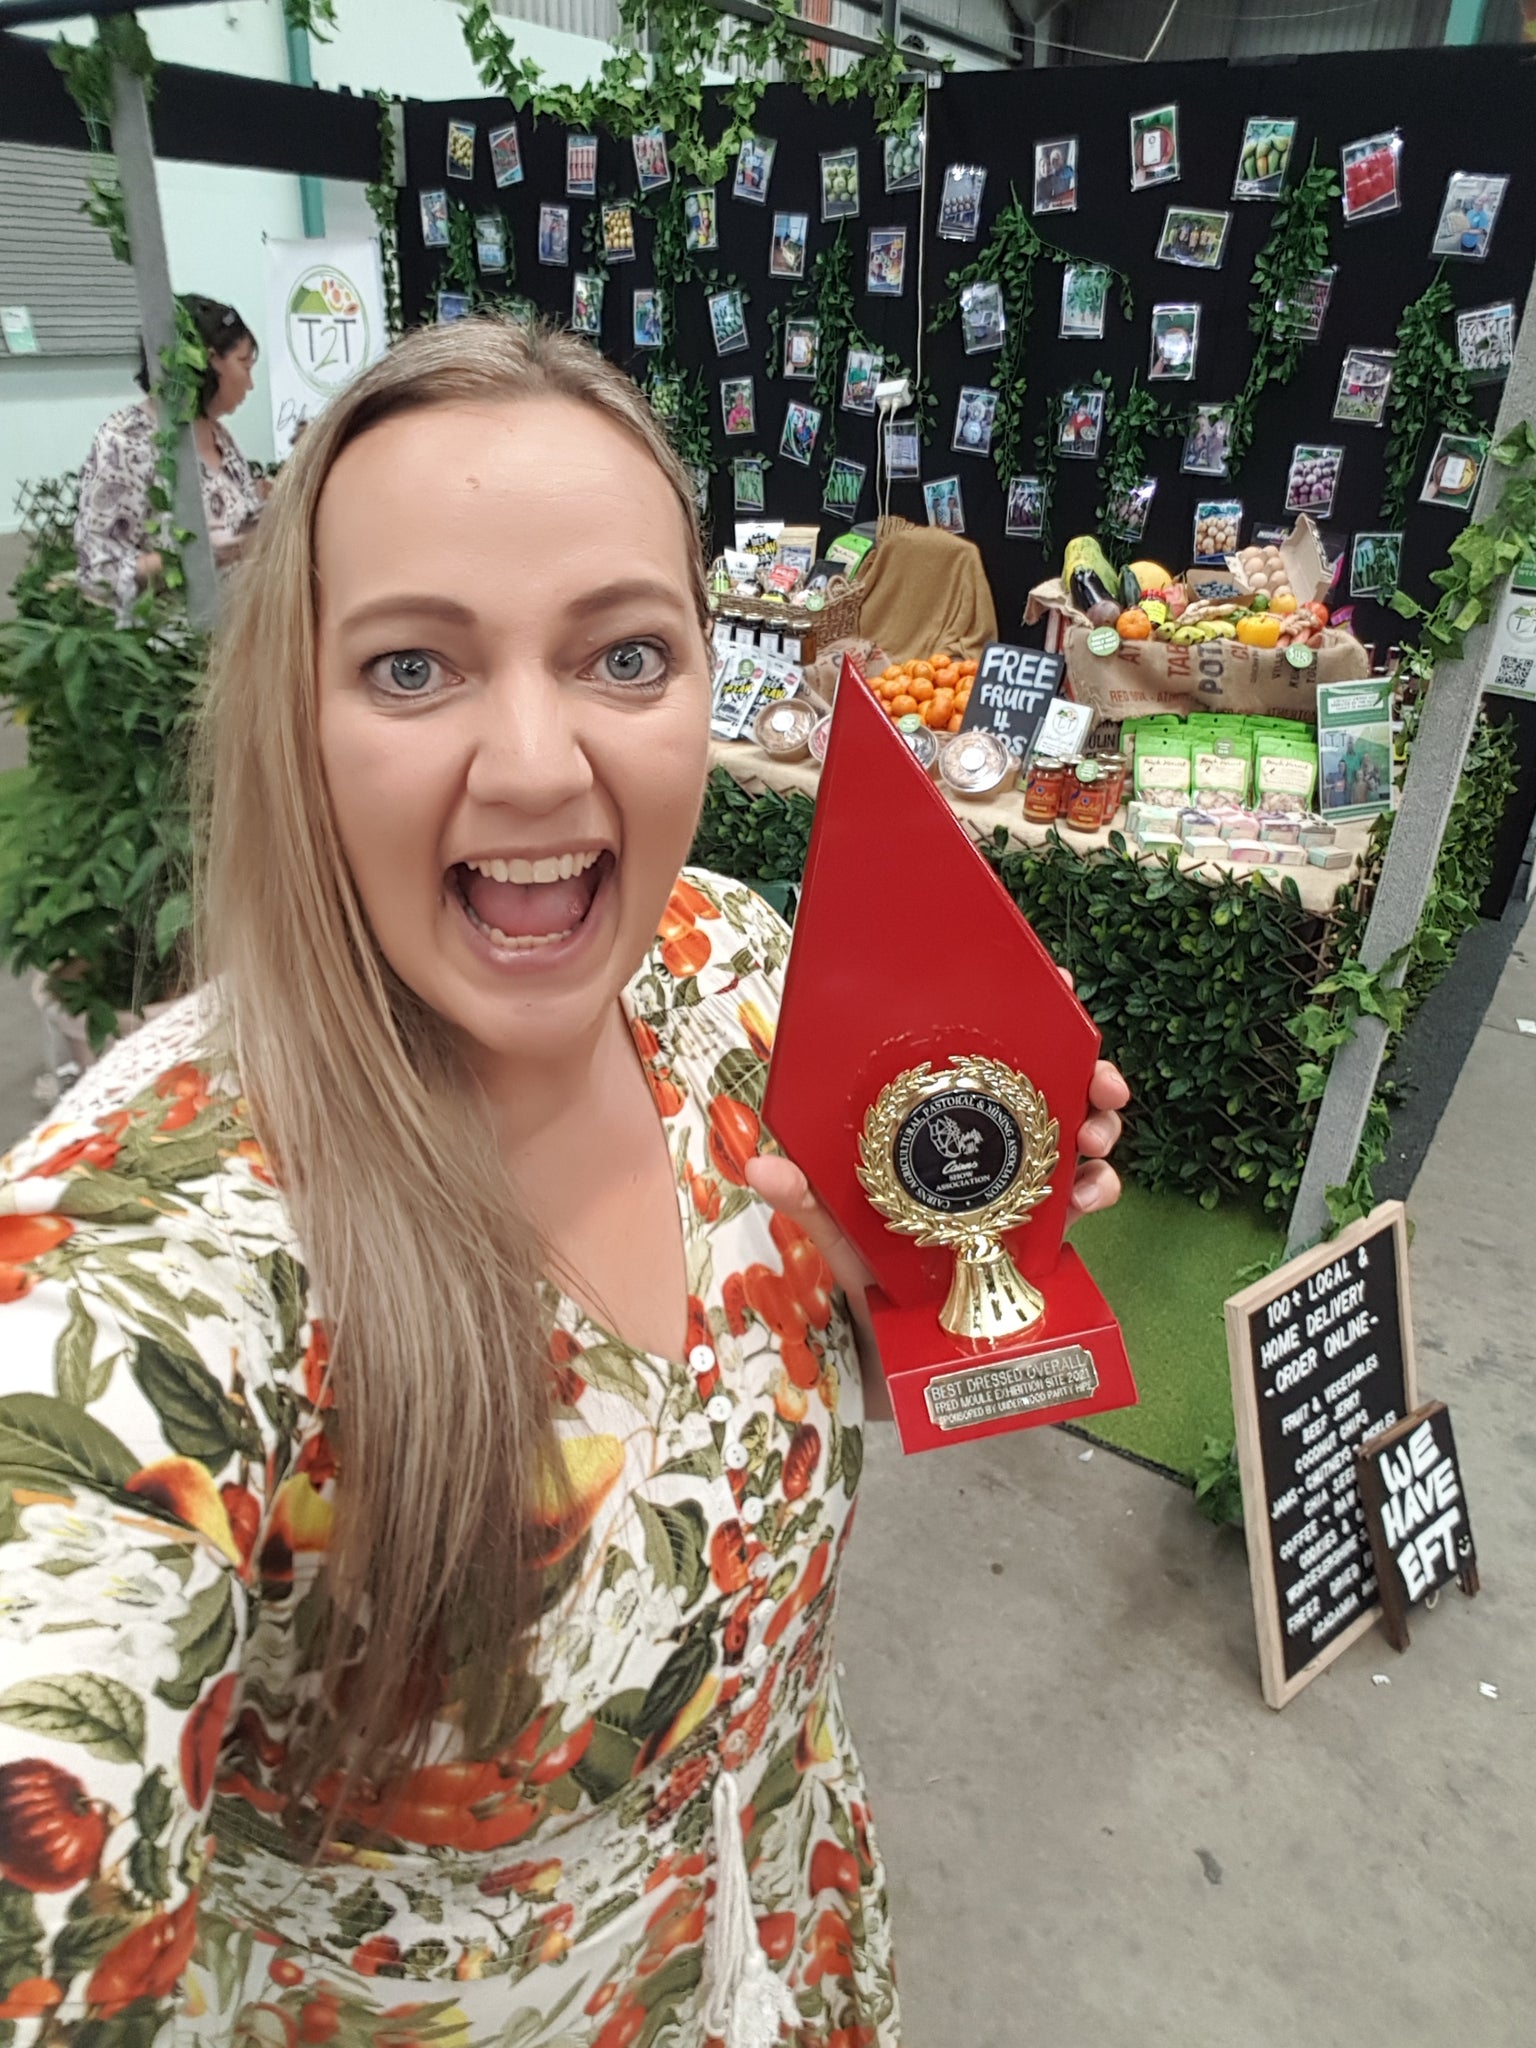 Angela Nason Tablelands to Tabletop Best Dressed Stall Award at The Cairns Show 2021